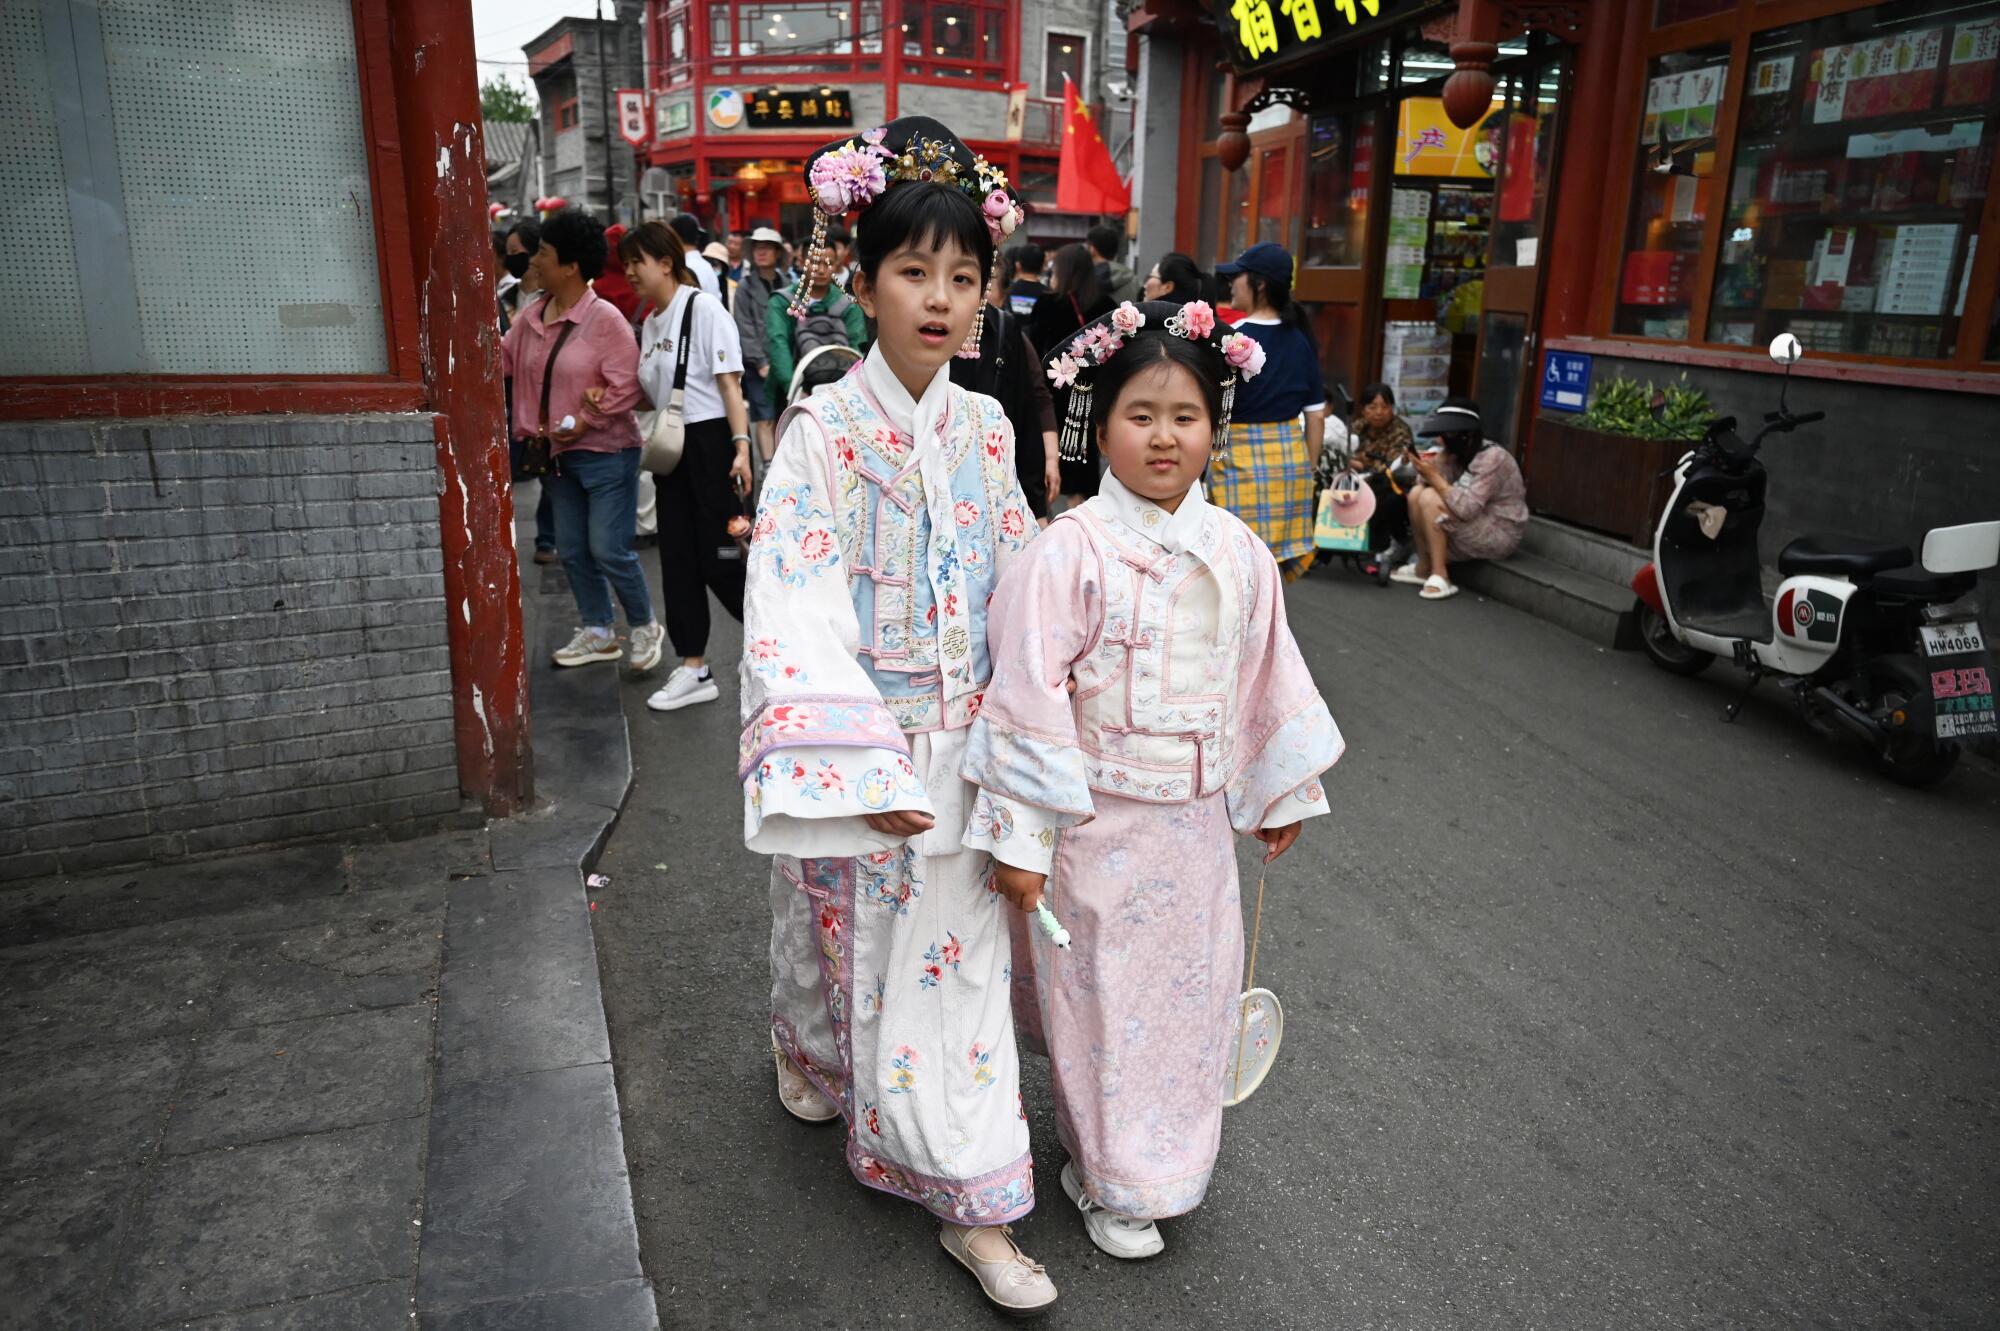 Two girls dressed in traditional pastel tunics walk in a tourist shopping area